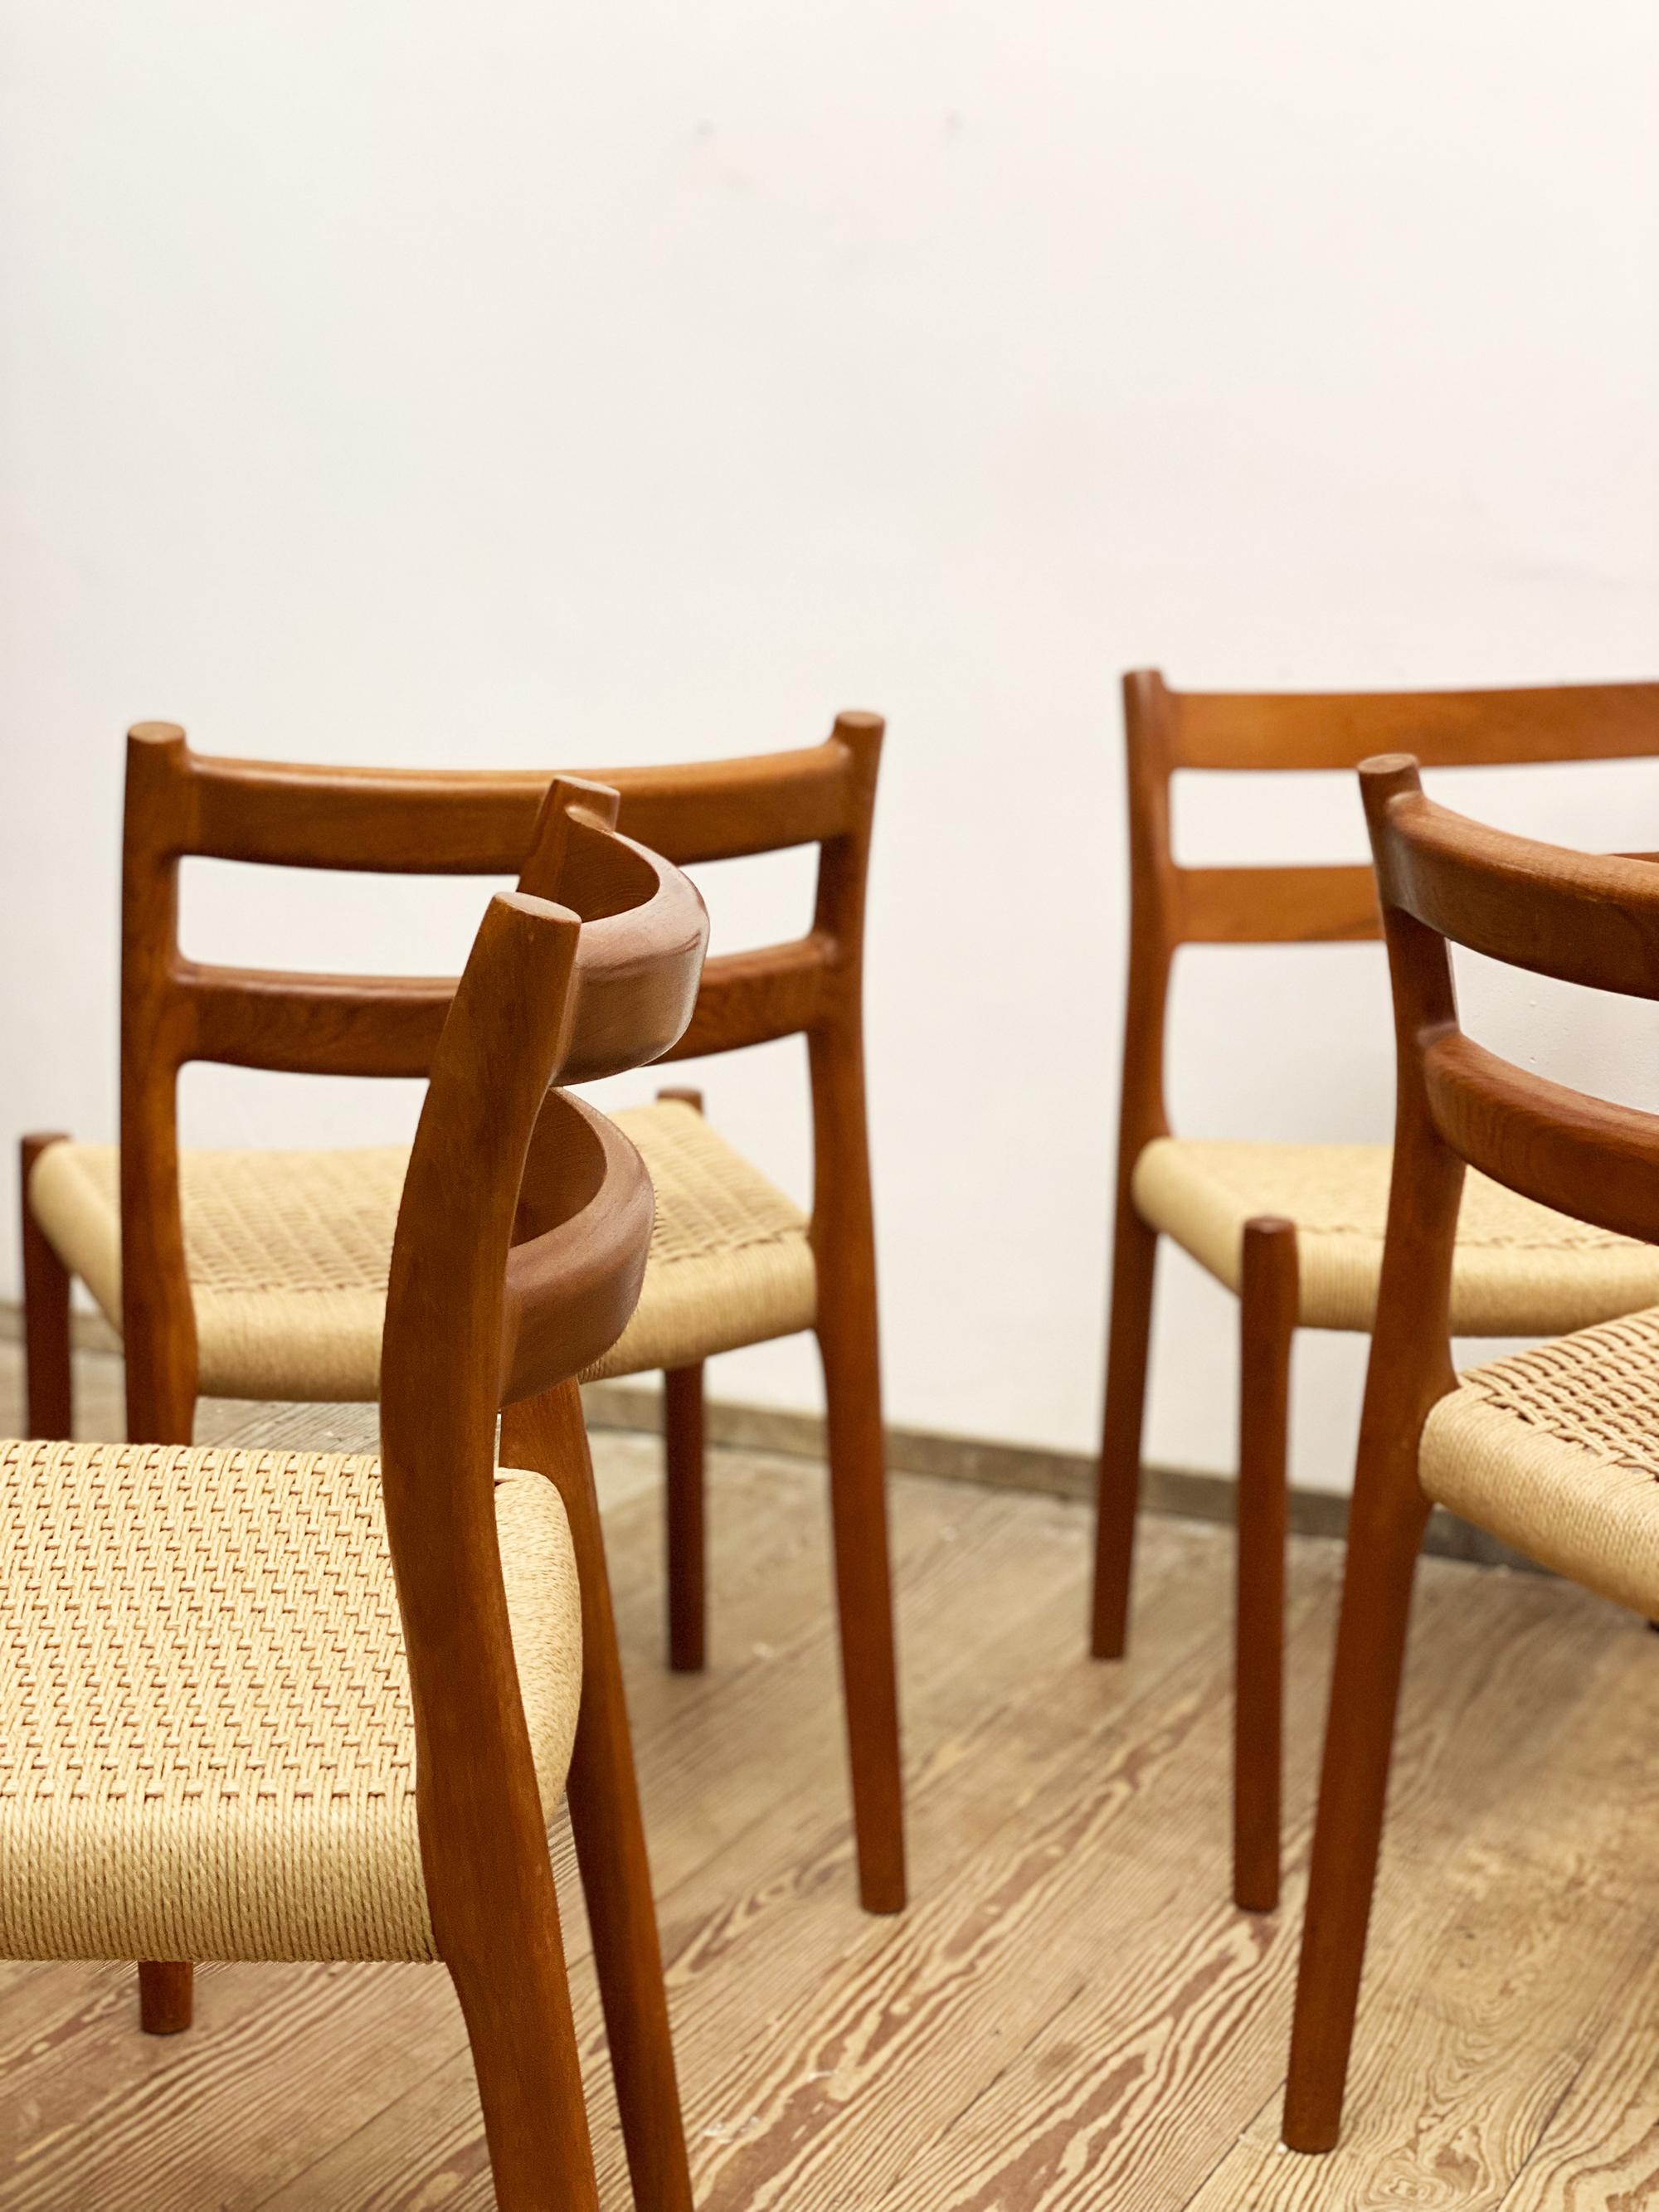 Mid-20th Century 4 Danish Mid-Century Teak Dining Chairs #84 by Niels O. Møller for J. L. Moller